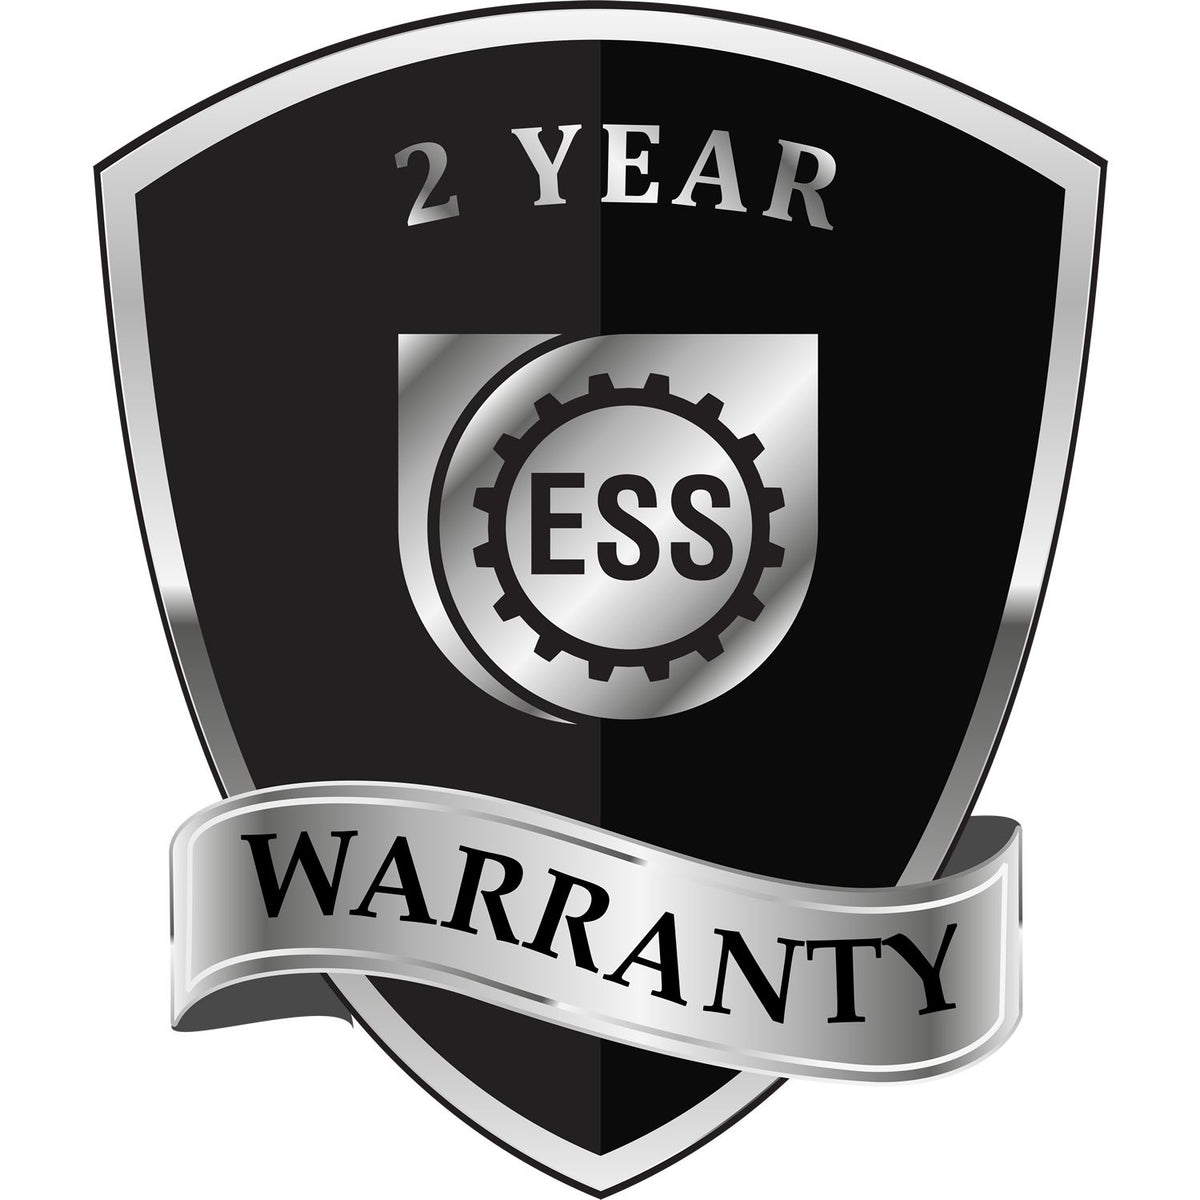 A black and silver badge or emblem showing warranty information for the Hawaii Geologist Desk Seal